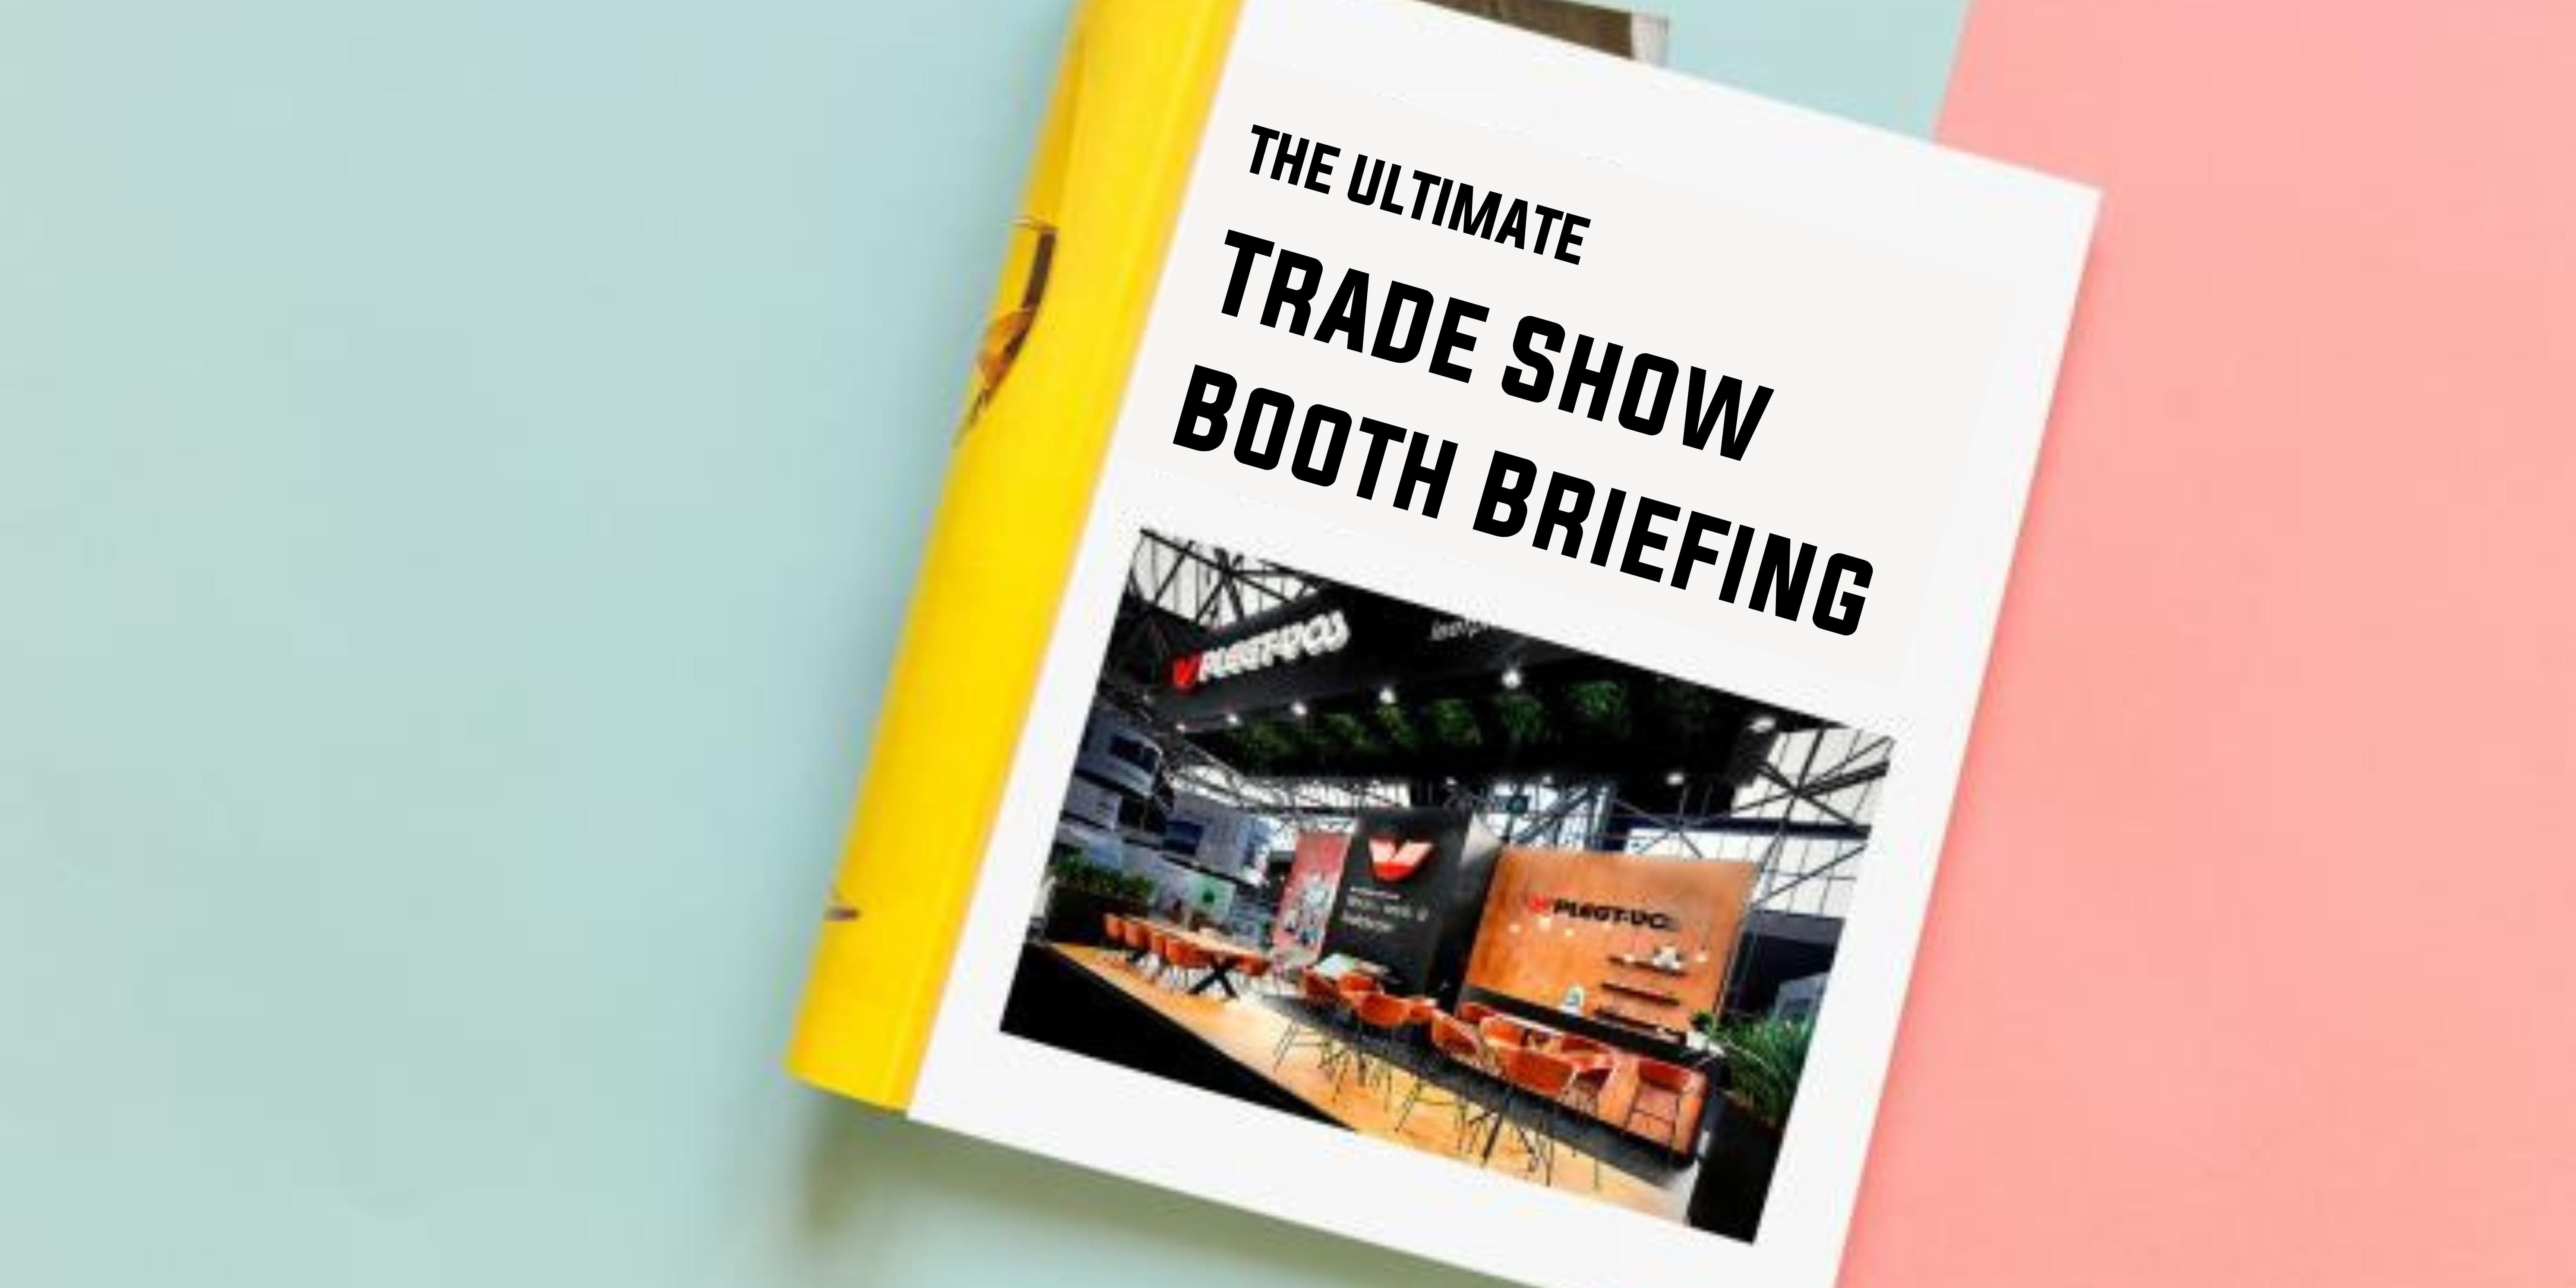 Ultimate trade show booth briefing